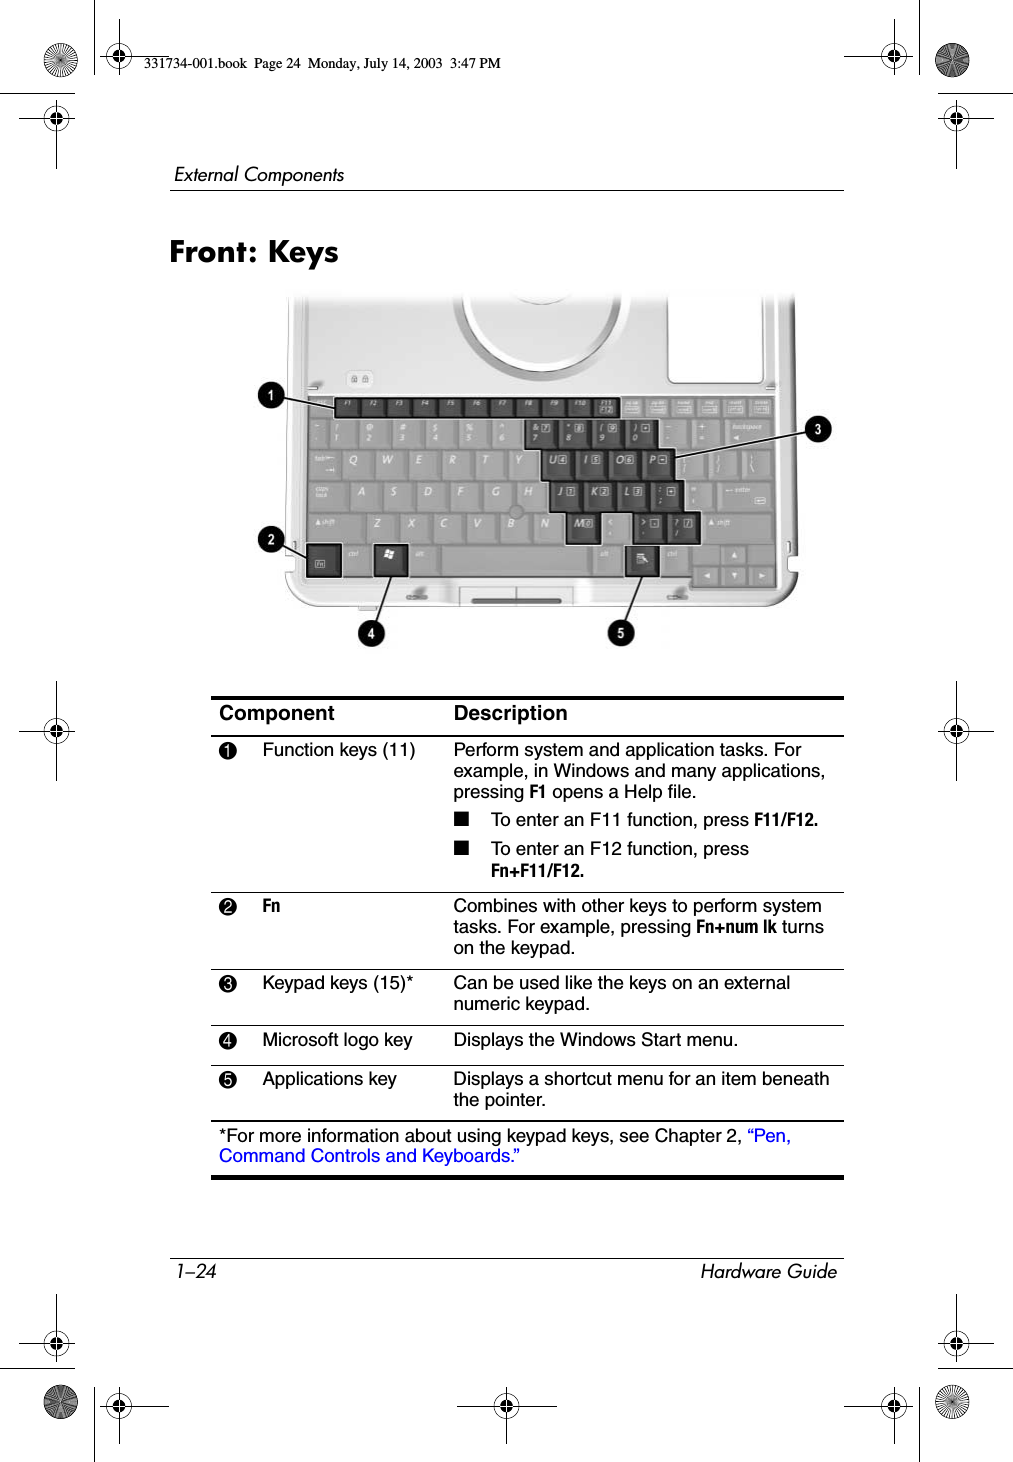 1–24 Hardware GuideExternal ComponentsFront: KeysComponent Description1Function keys (11) Perform system and application tasks. For example, in Windows and many applications, pressing F1 opens a Help file.■To enter an F11 function, press F11/F12.■To enter an F12 function, press Fn+F11/F12.2Fn Combines with other keys to perform system tasks. For example, pressing Fn+num lk turns on the keypad.3Keypad keys (15)* Can be used like the keys on an external numeric keypad.4Microsoft logo key Displays the Windows Start menu.5Applications key Displays a shortcut menu for an item beneath the pointer.*For more information about using keypad keys, see Chapter 2, “Pen, Command Controls and Keyboards.”331734-001.book  Page 24  Monday, July 14, 2003  3:47 PM